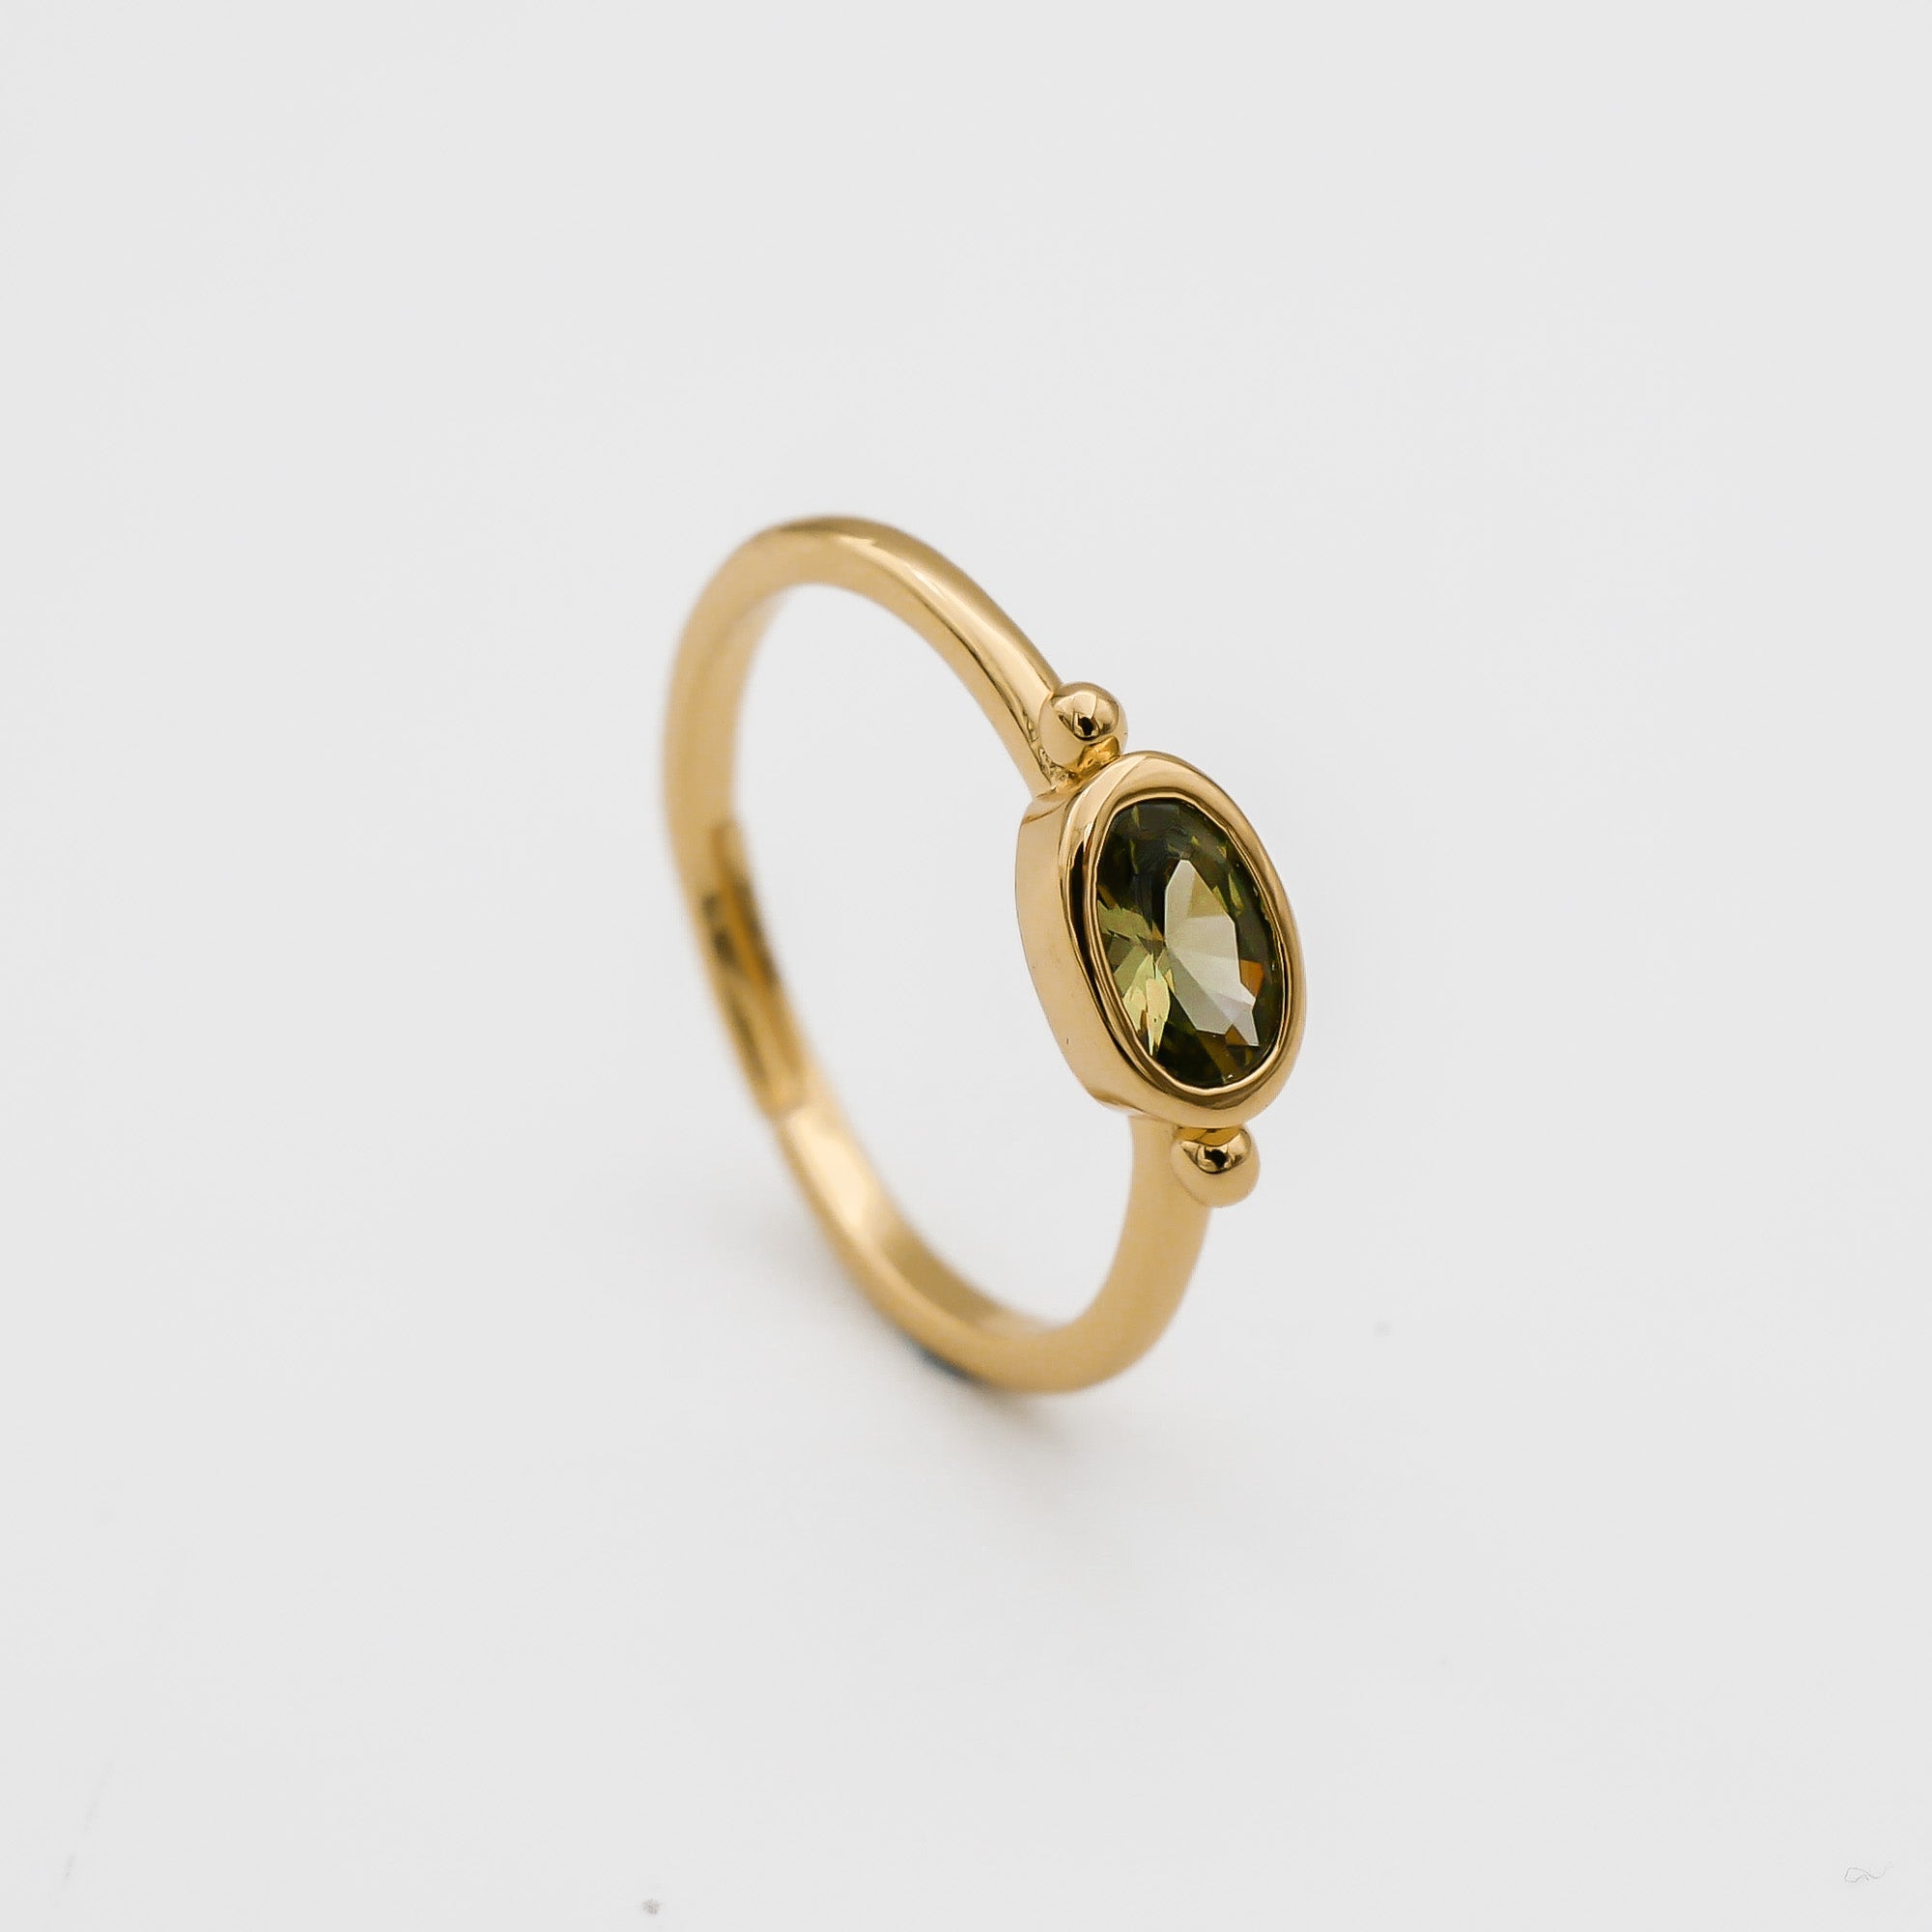 Birthstone jewellery for August with peridot ring